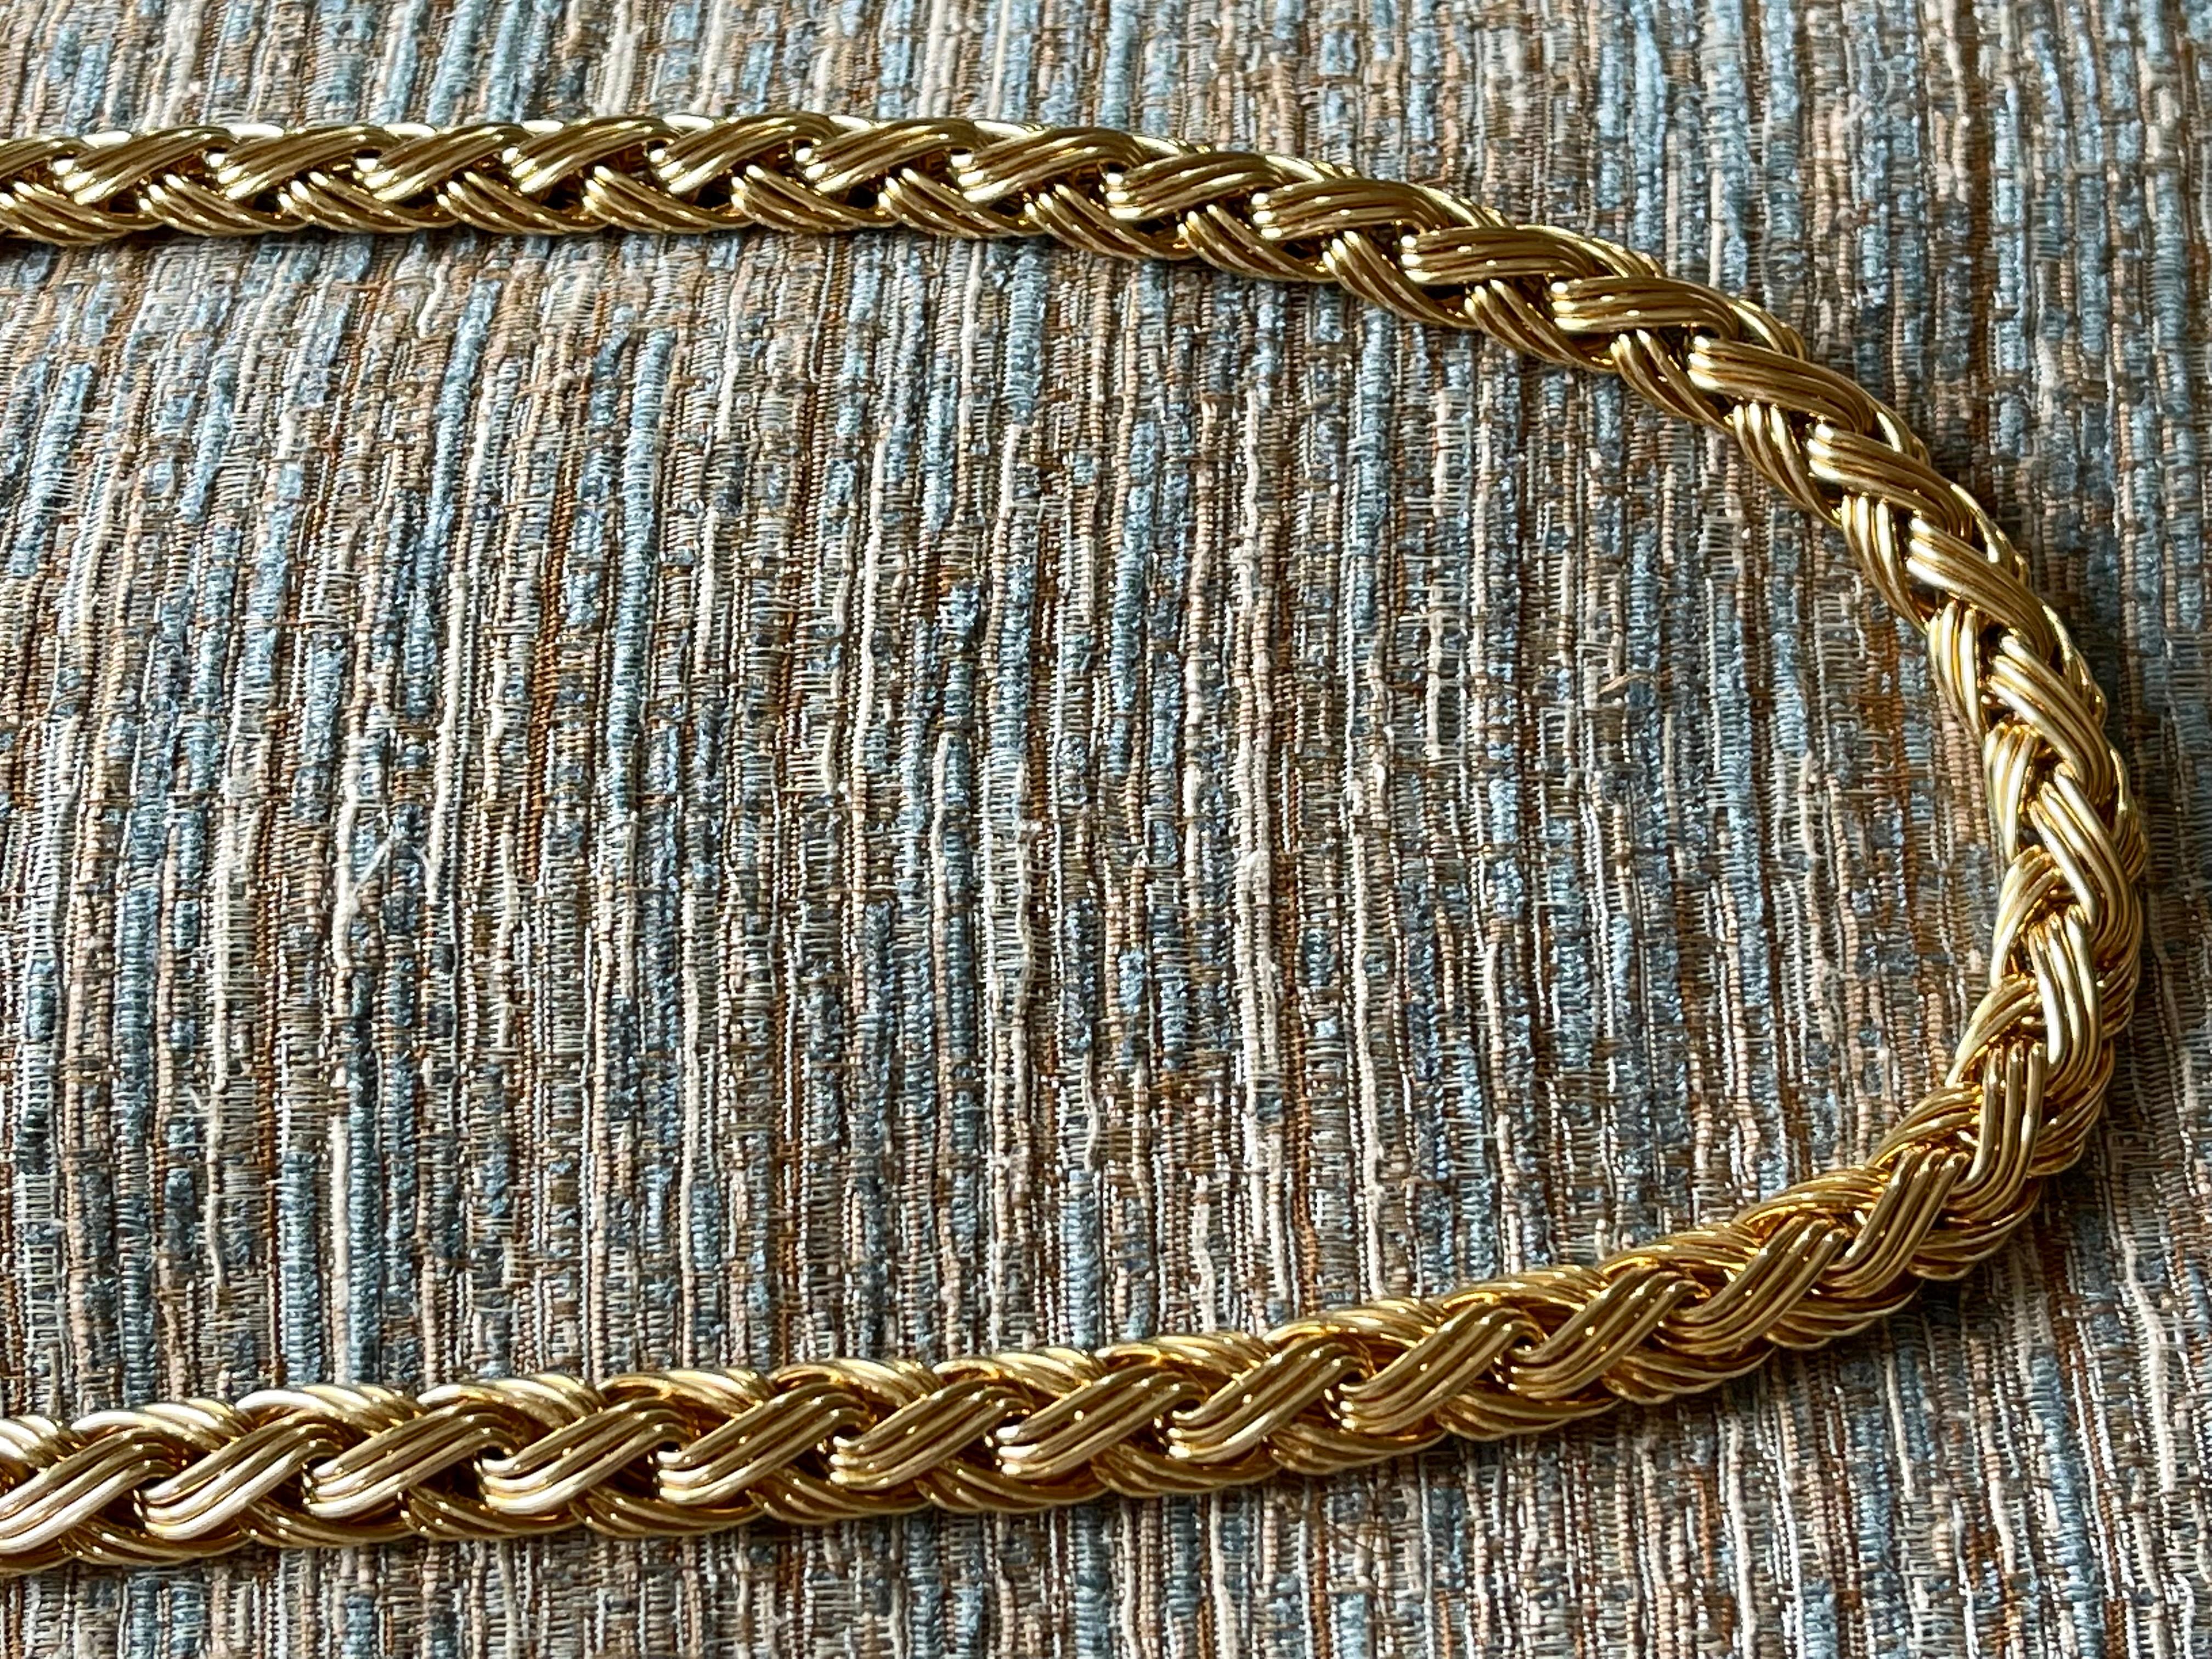 Vintage 18 K Yellow Gold Cable Knit Neckalce and Bracelet Signed Meister Zurich For Sale 5